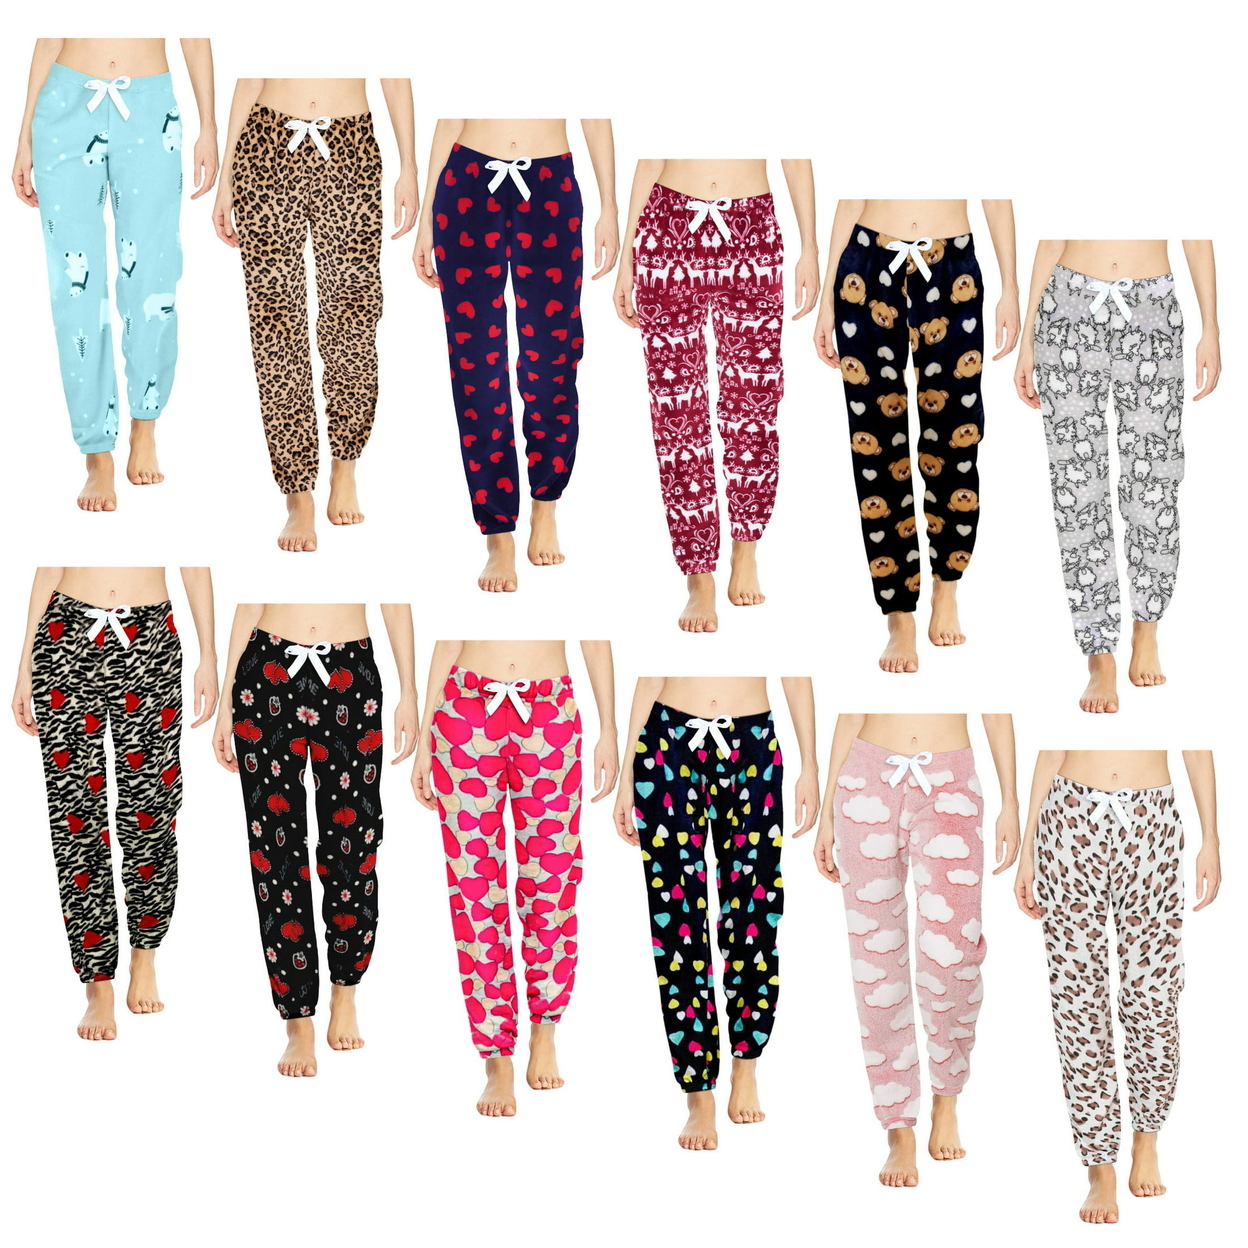 4-Pack: Women's Printed Ultra-Soft Comfy Stretch Micro-Fleece Pajama Lounge Pants - Xx-large, Shapes